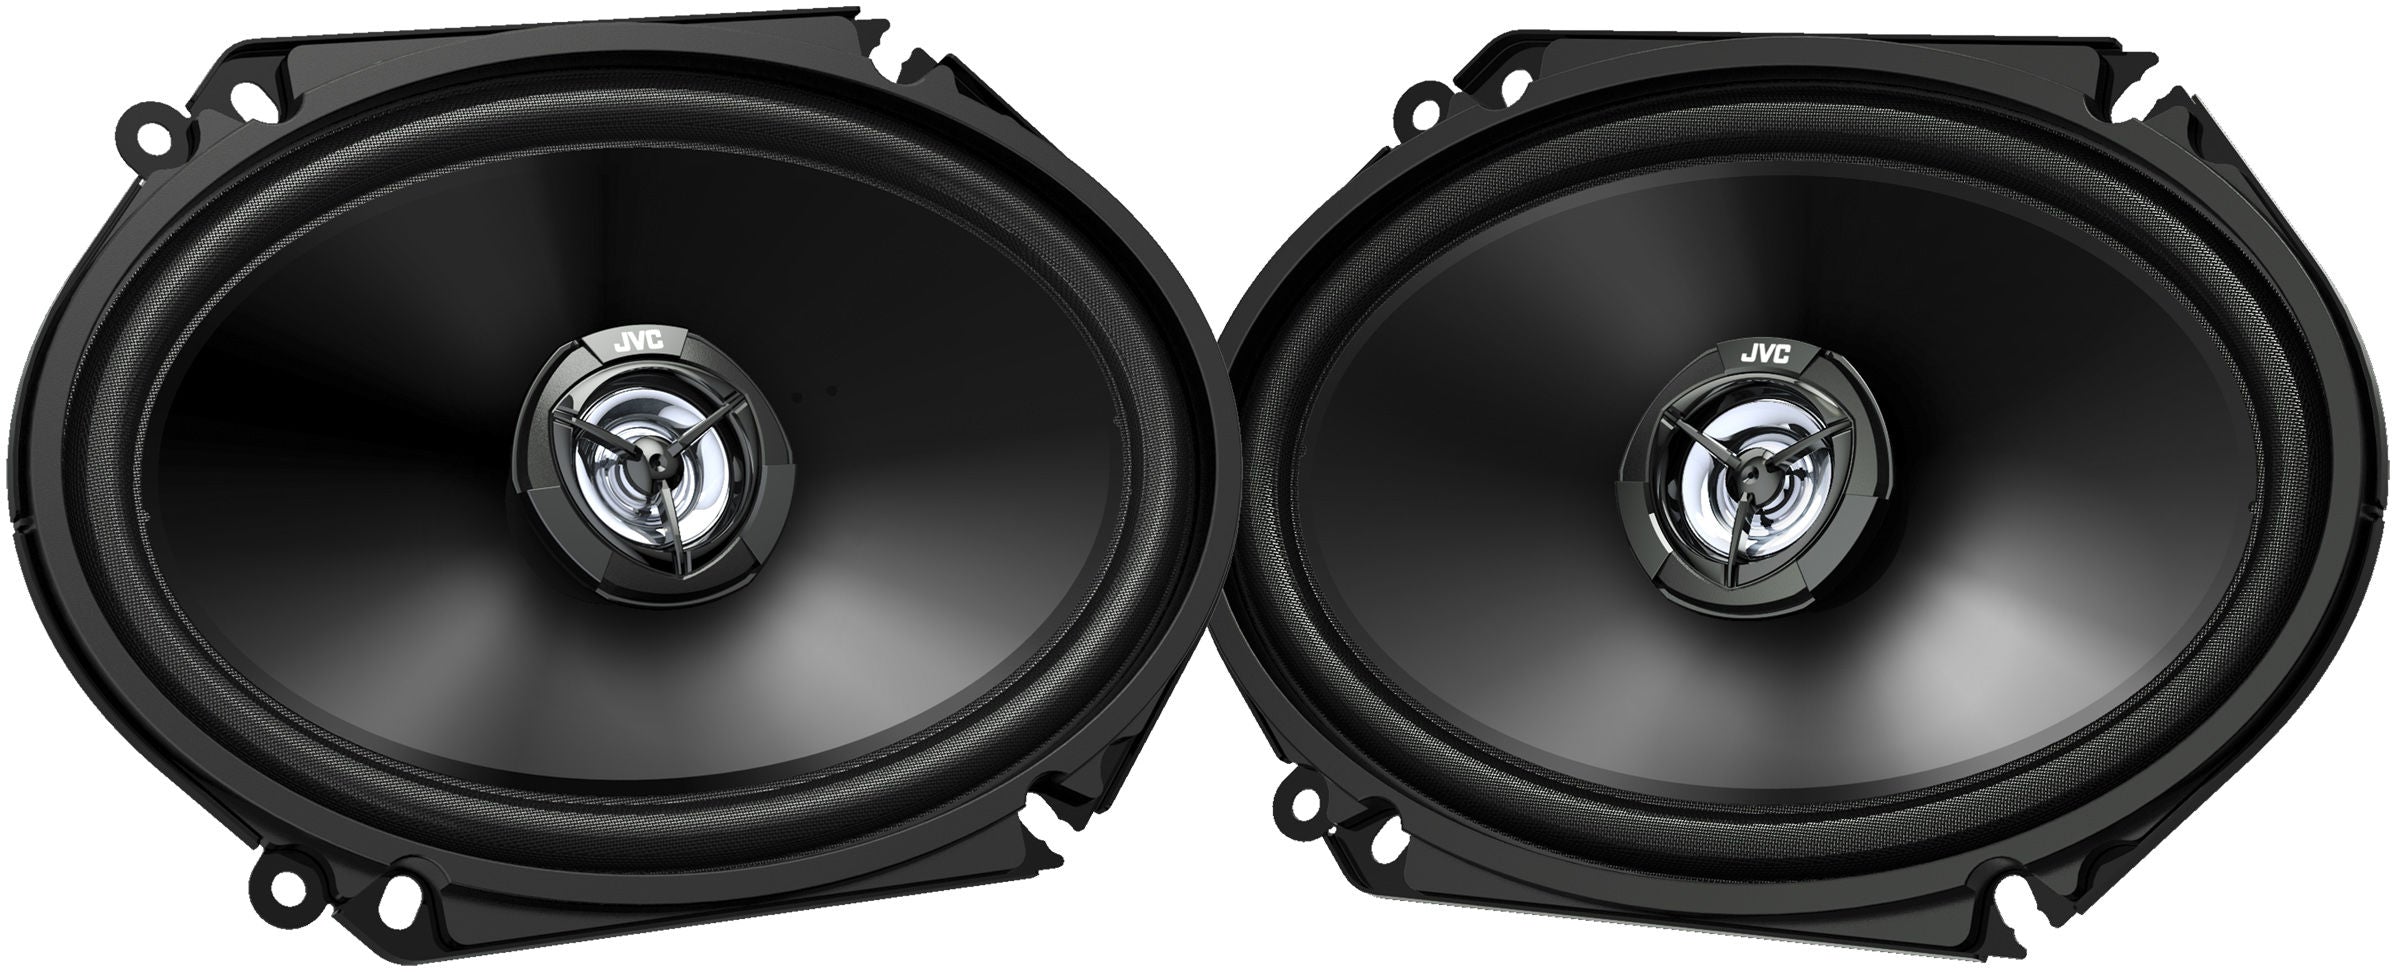 6"X8" 2-Way Coaxial Speakers 300w Max Power